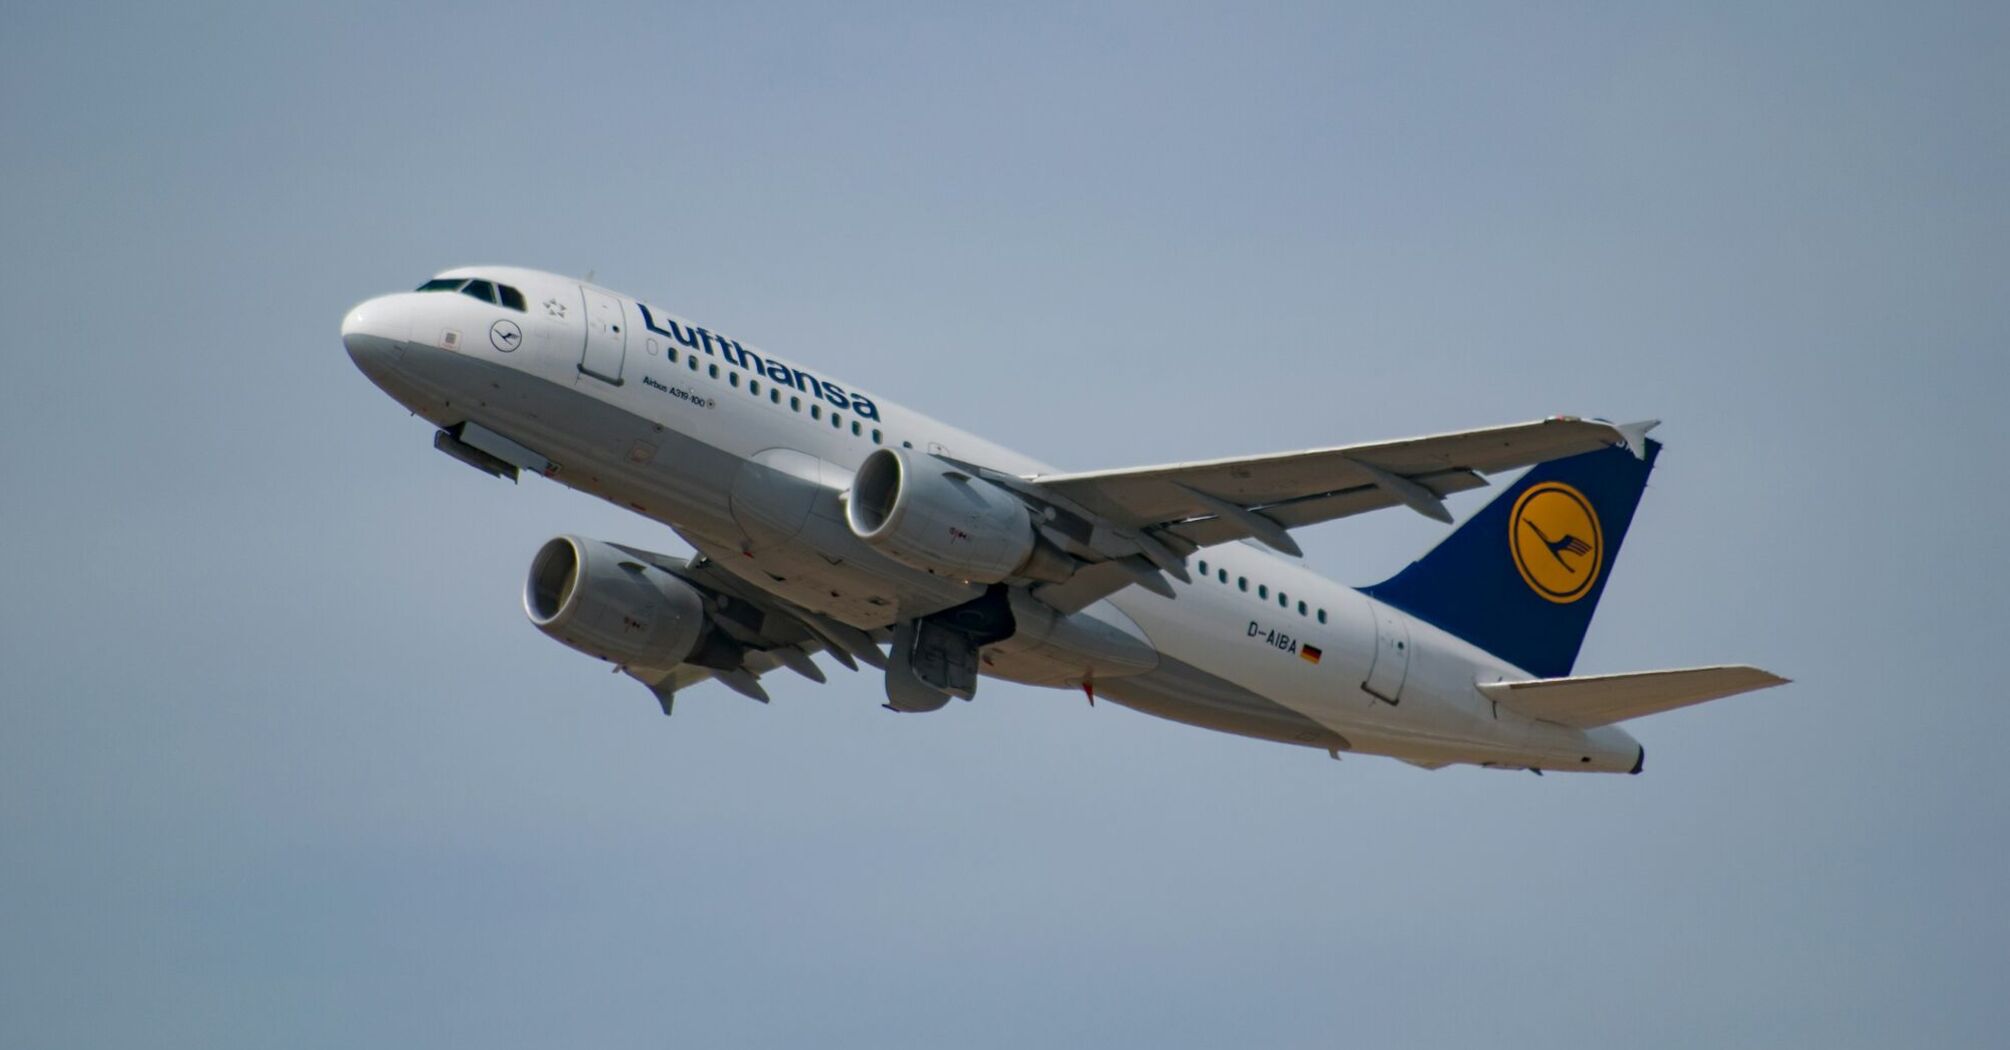 Lufthansa airplane taking off into the sky